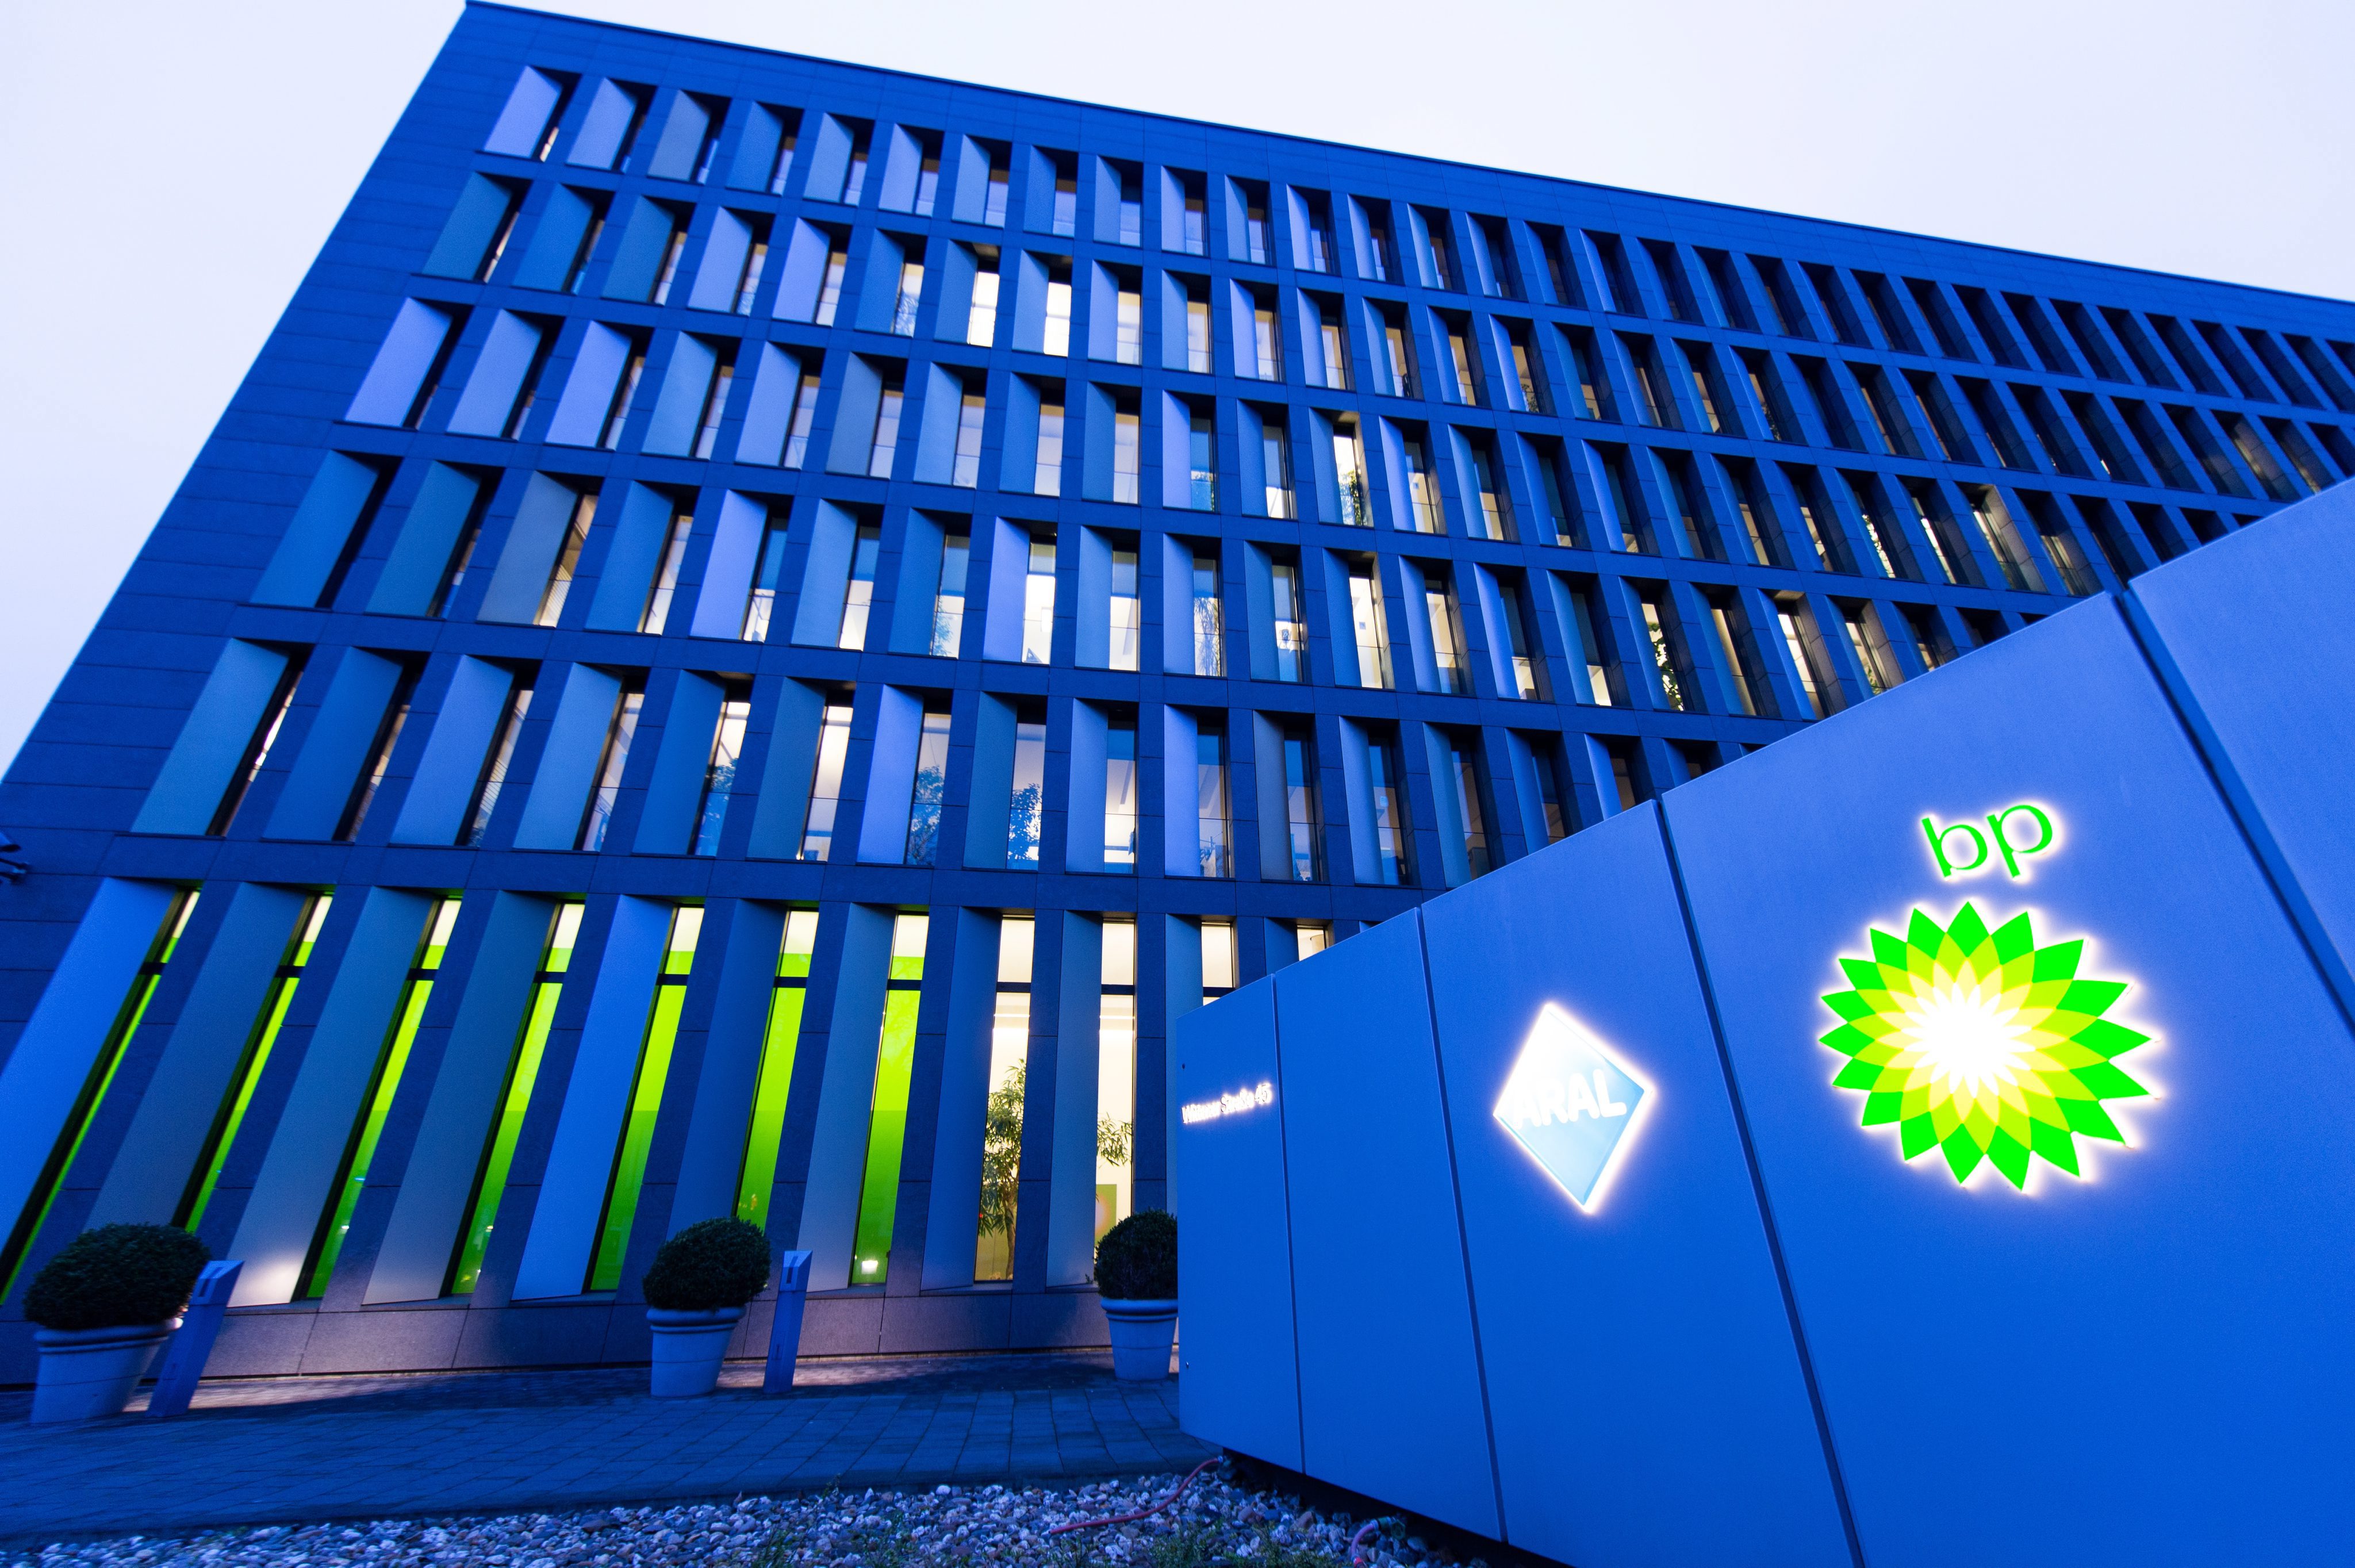 2016-03-31 00:00:00 epa05237325 The German administrative site of the oil and energy company BP in Bochum, Germany, 31 March 2016. In the view of falling oil prices, BP will be phasing out 580 jobs in Germany by 2020, according to media reports. EPA/MONIKA SKOLIMOWSKA